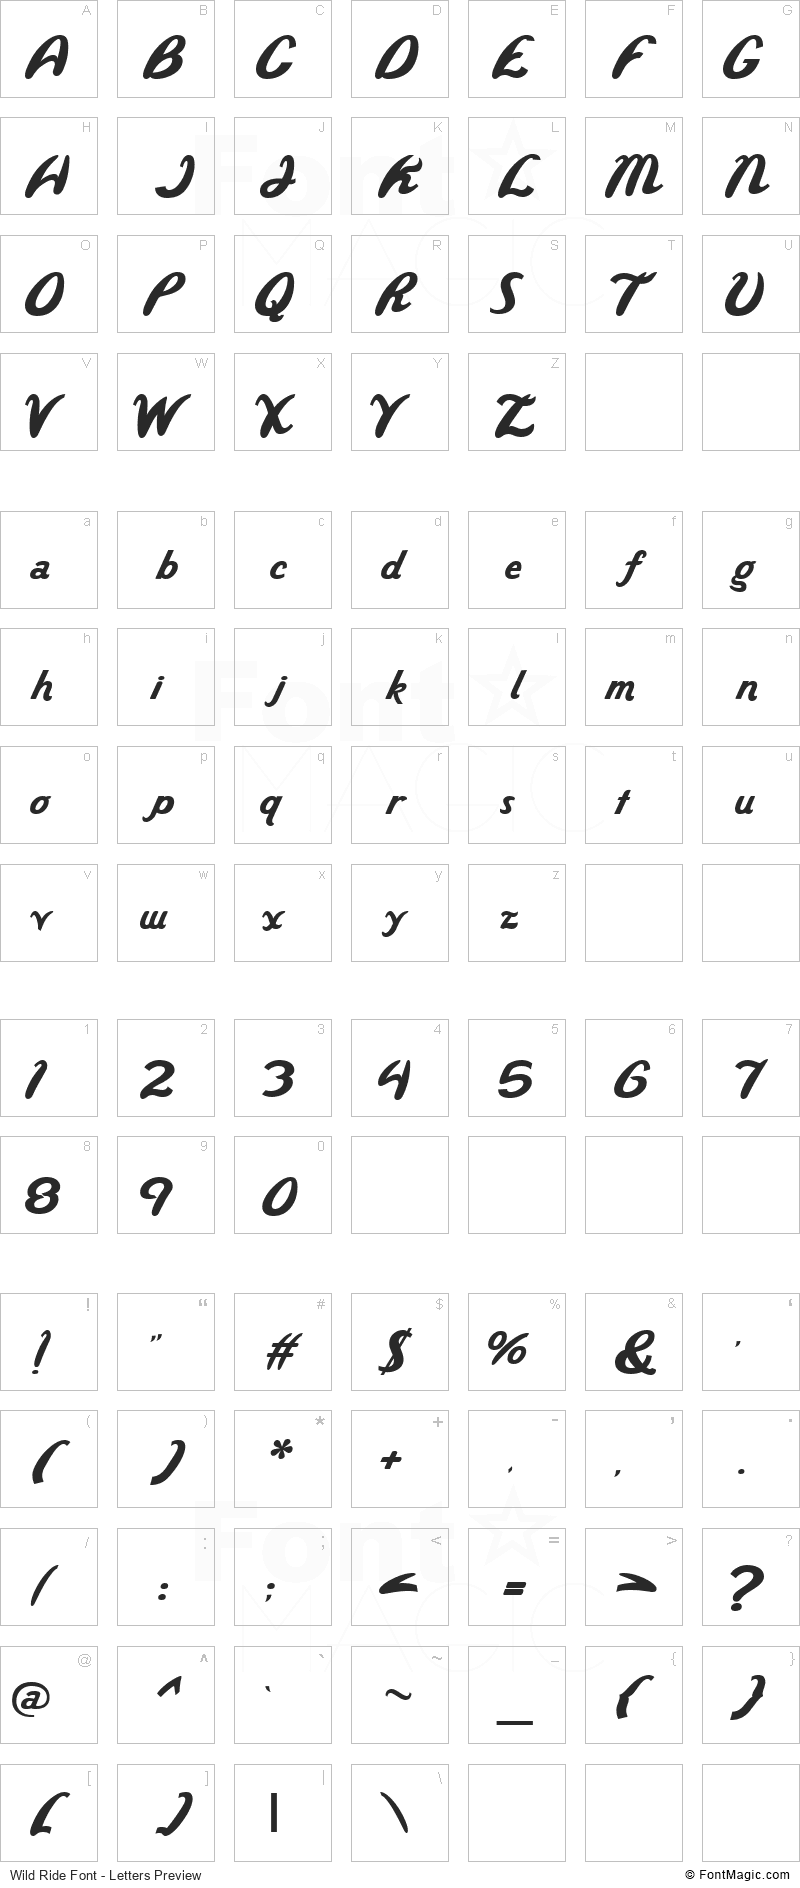 Wild Ride Font - All Latters Preview Chart